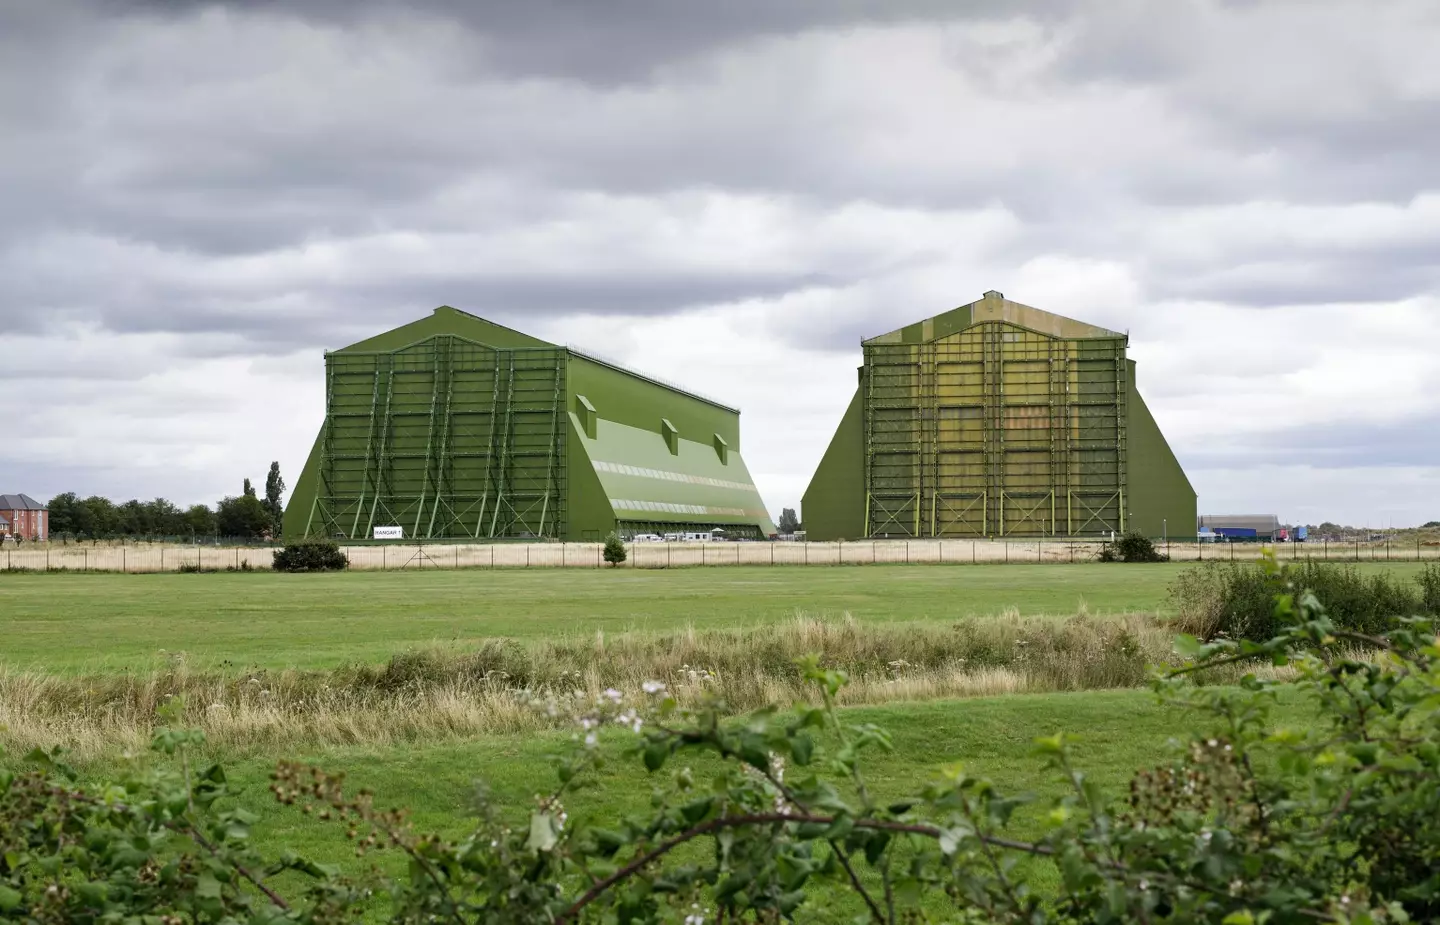 Filmed at Cardington Studios, contestants in Squid Game: The Challenge claim they spent hours in freezing conditions unable to move.